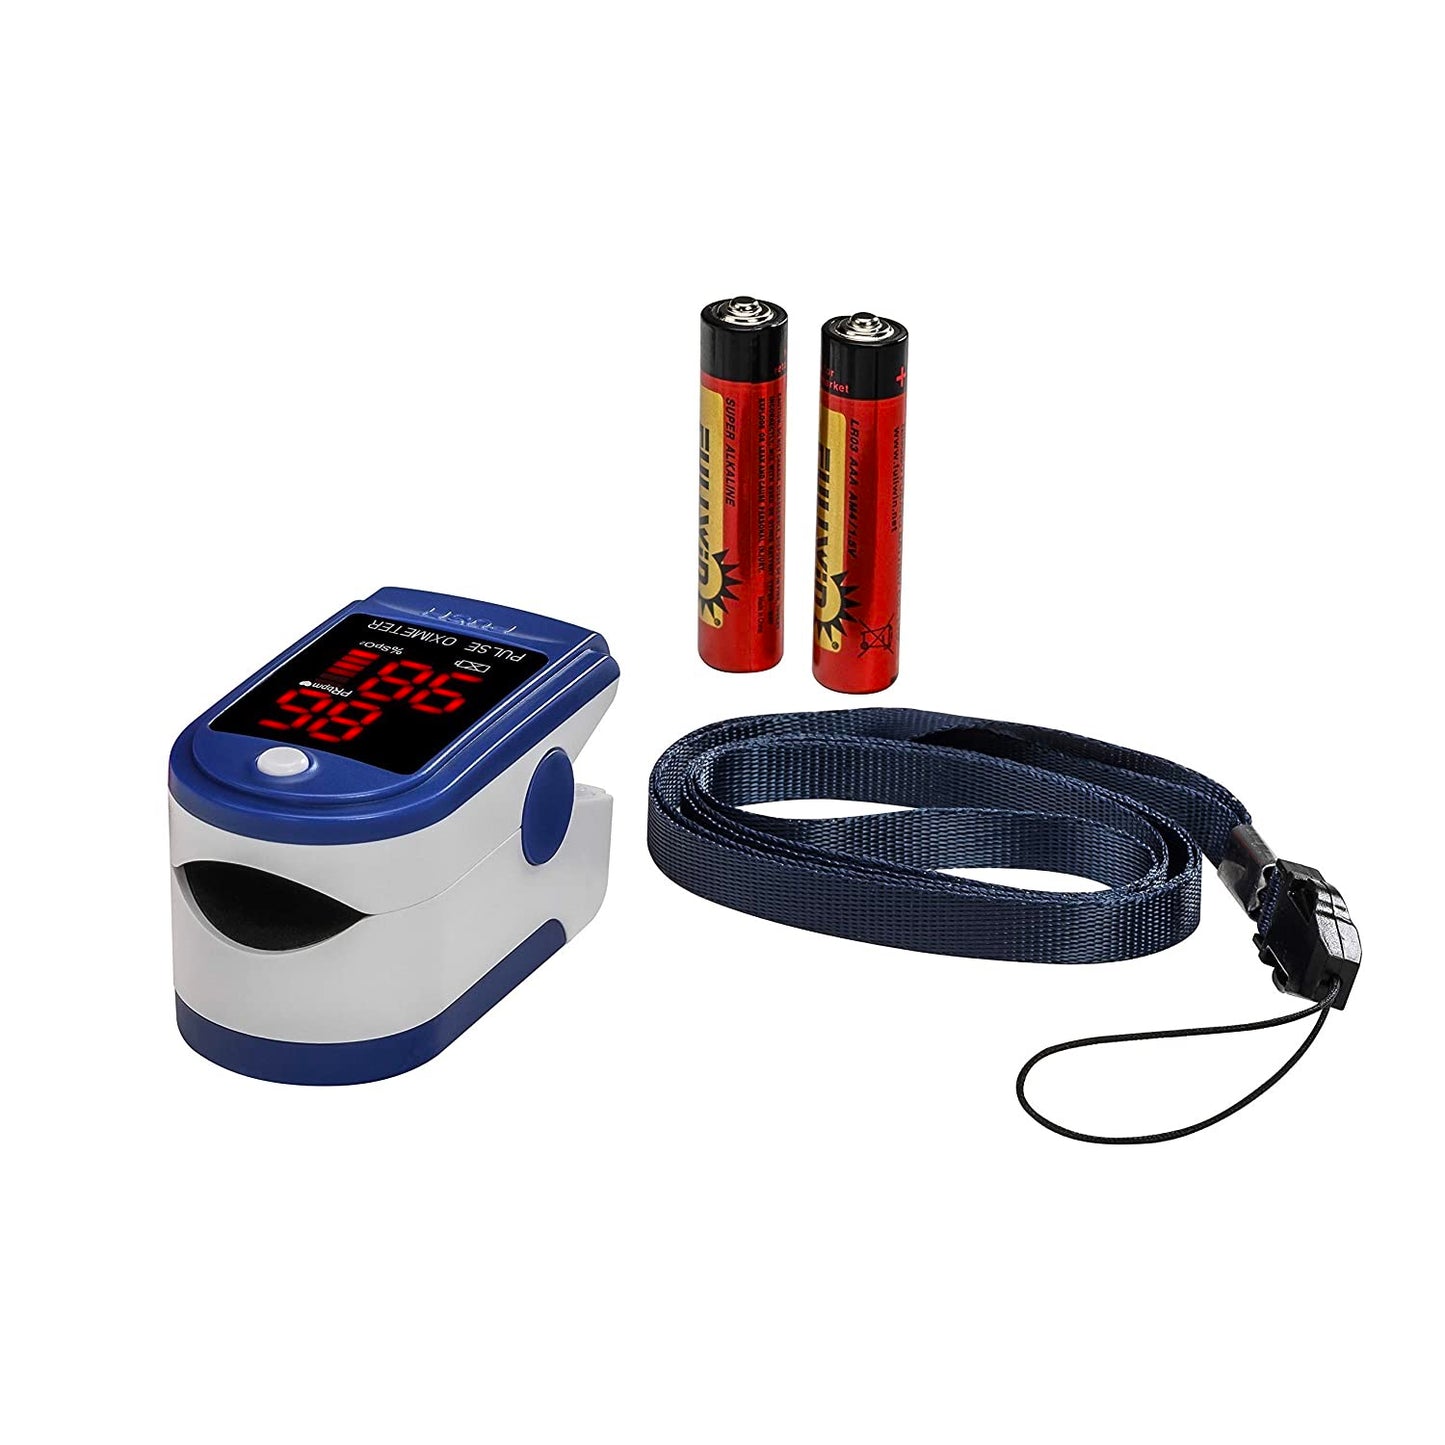 pulse oximeter with batteries